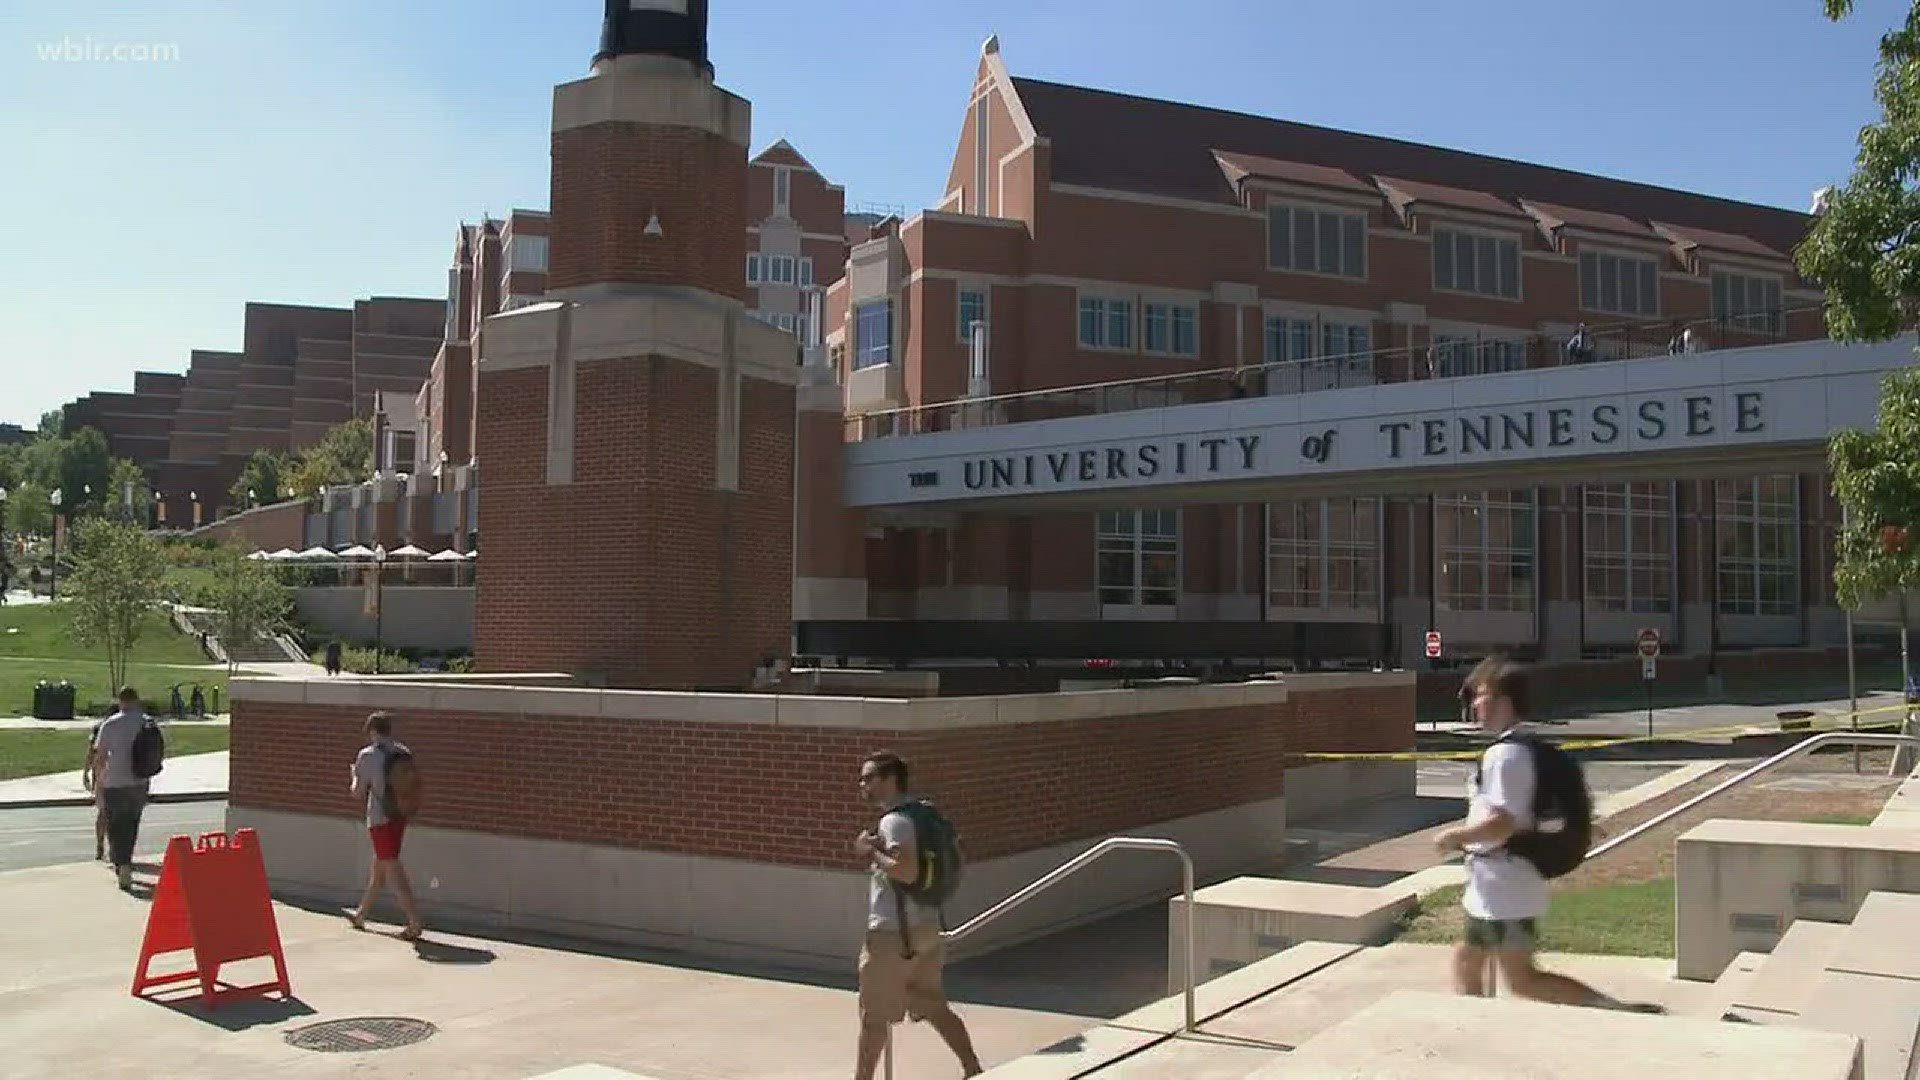 Feb. 27, 2018: Arming teachers has proved a divisive solution to improving school safety. One University of Tennessee professor says carrying on campus is a "no-brainer" for him.